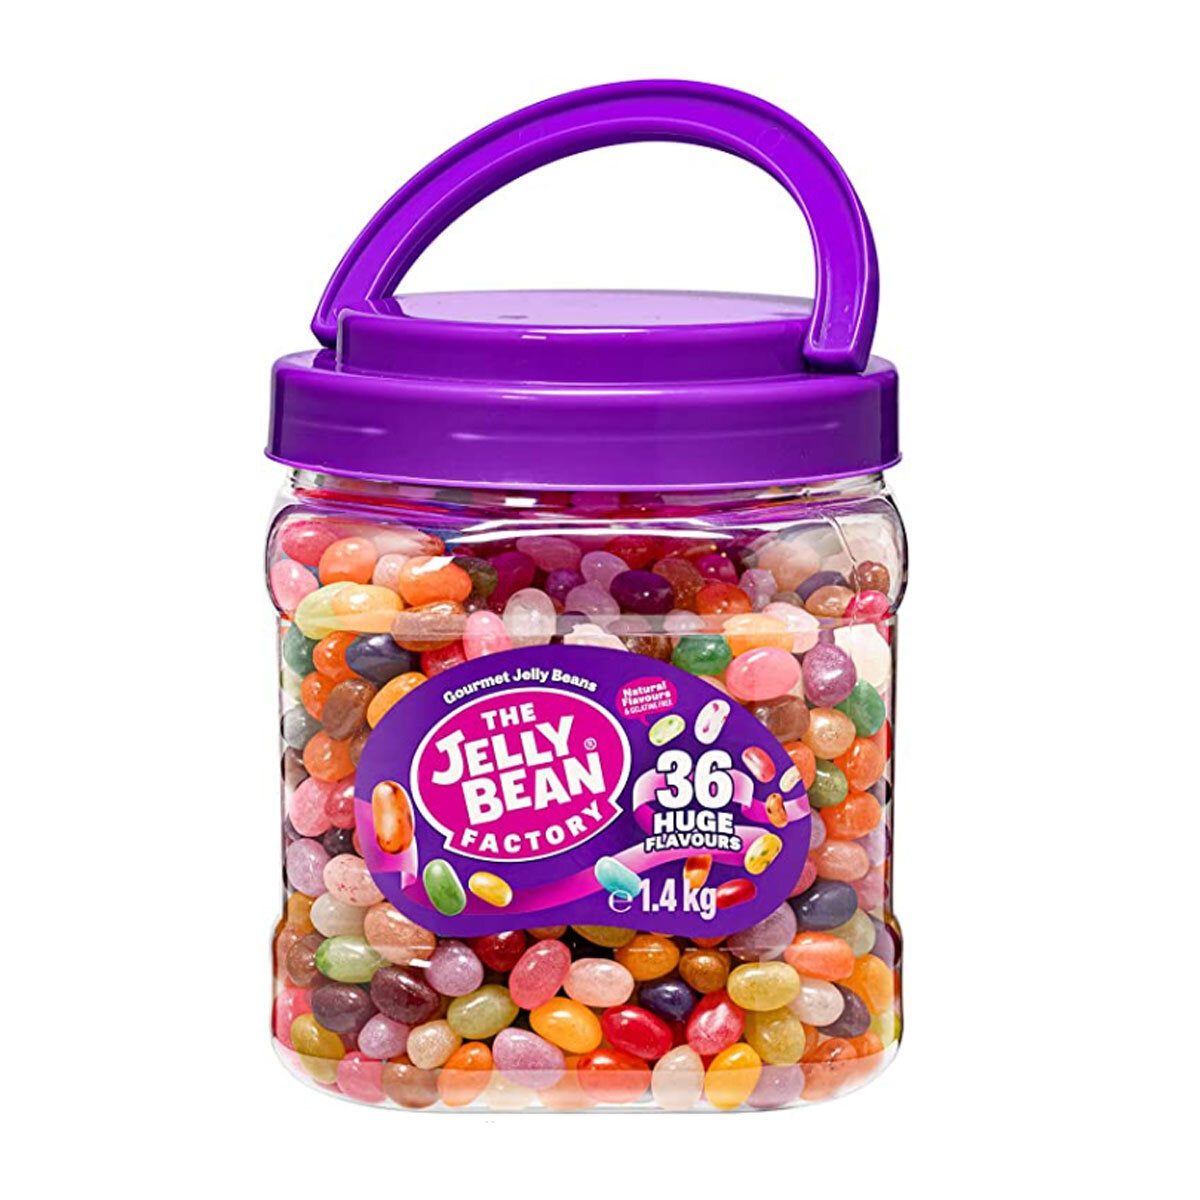 The Jelly Bean Factory 36 Flavour Mix - 1.4kg